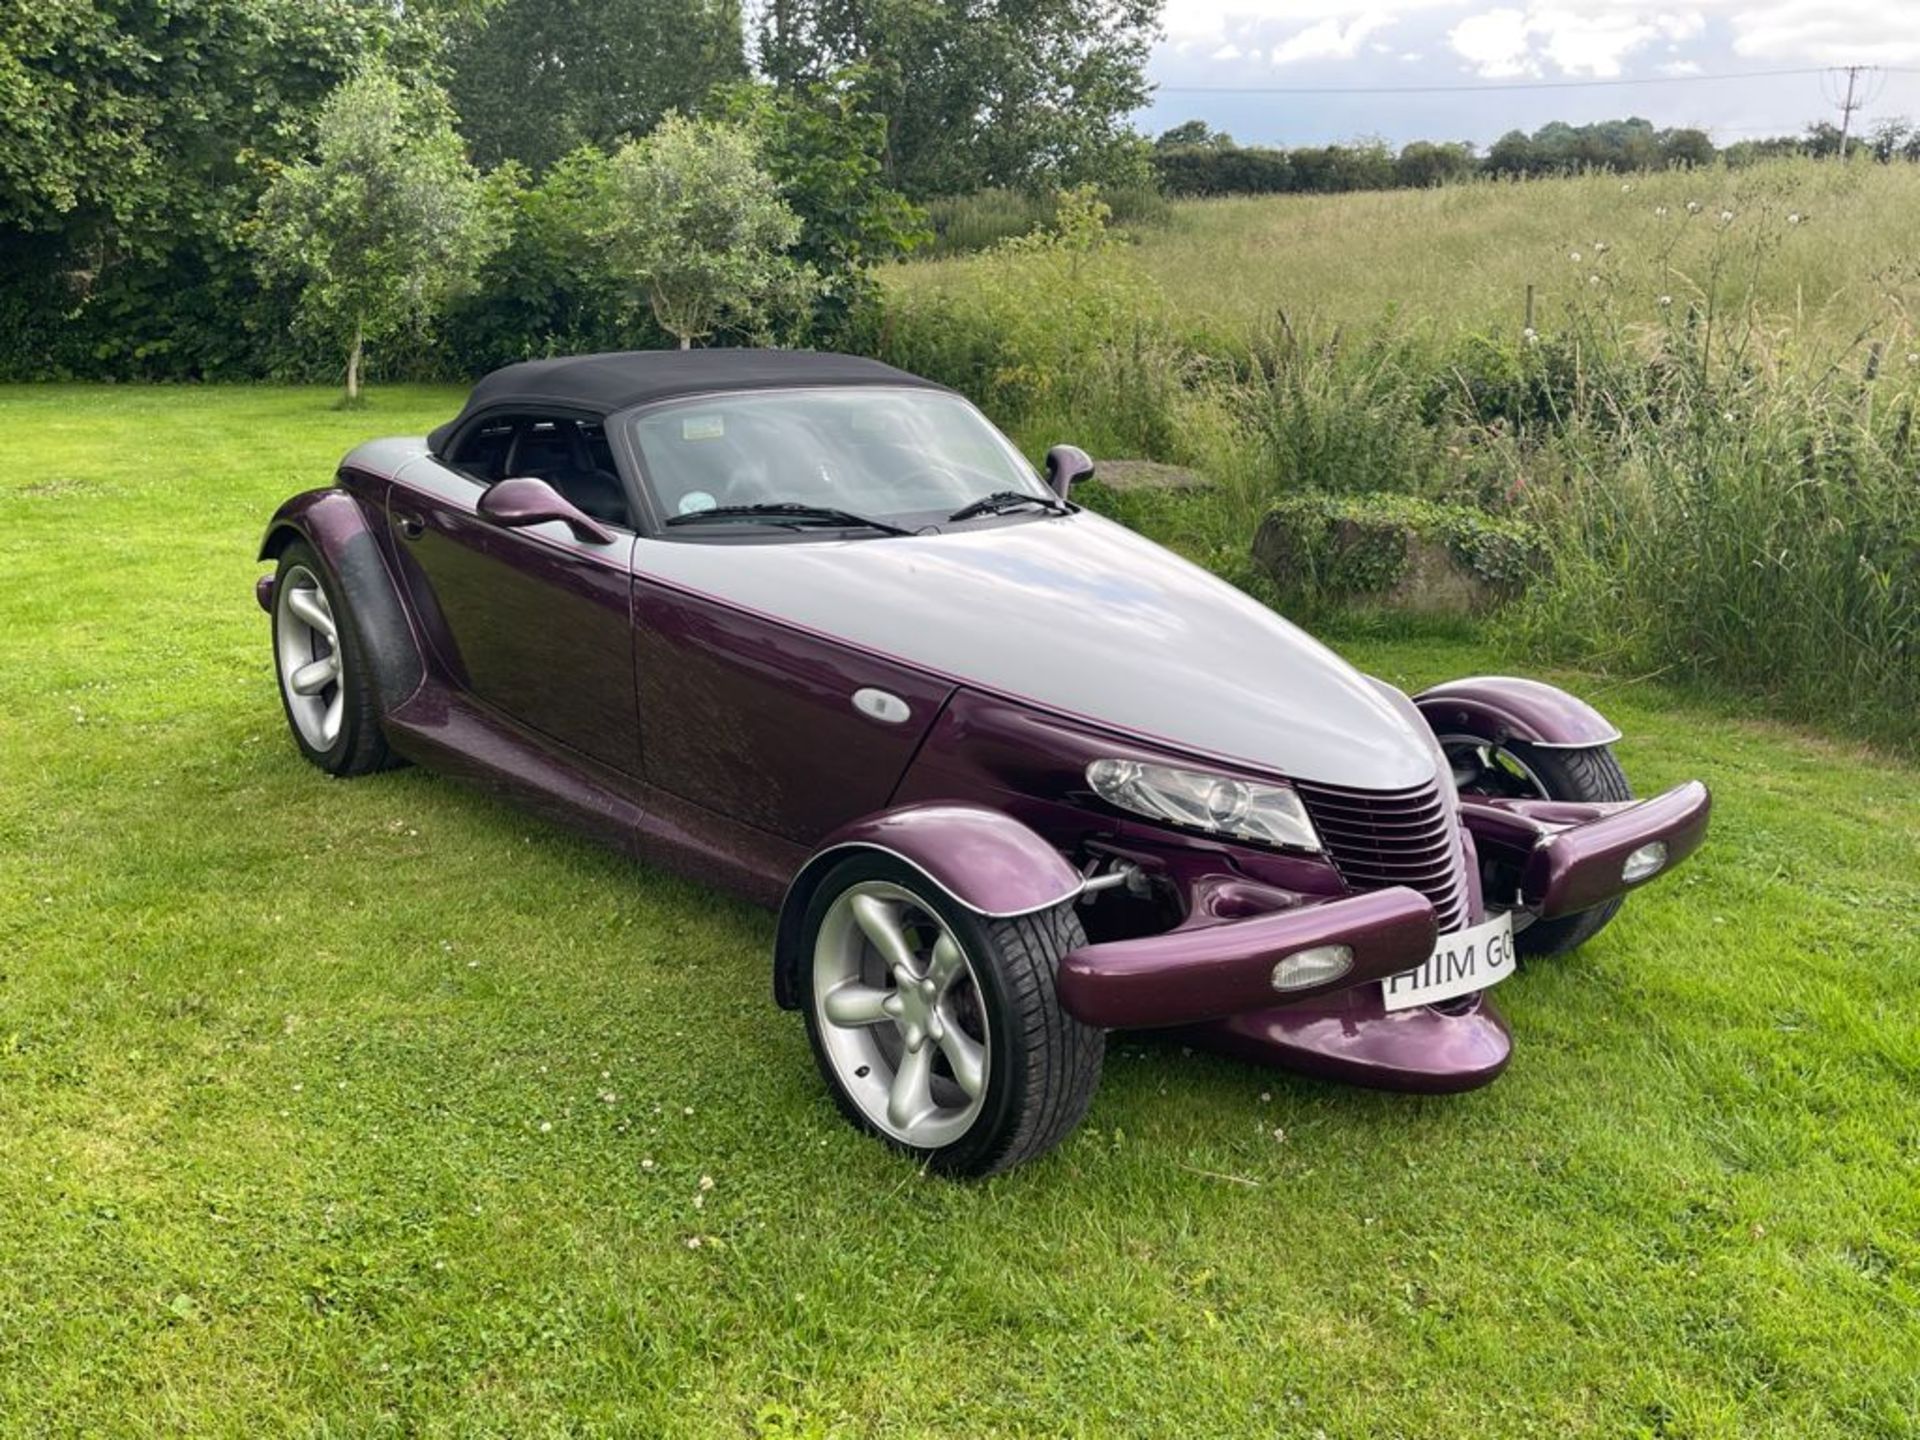 1998 CHRYSLER PLYMOUTH PROWLER V6 2 DOOR CONVERTIBLE, 3500cc PETROL ENGINE, AUTO *NO VAT* - Image 6 of 32